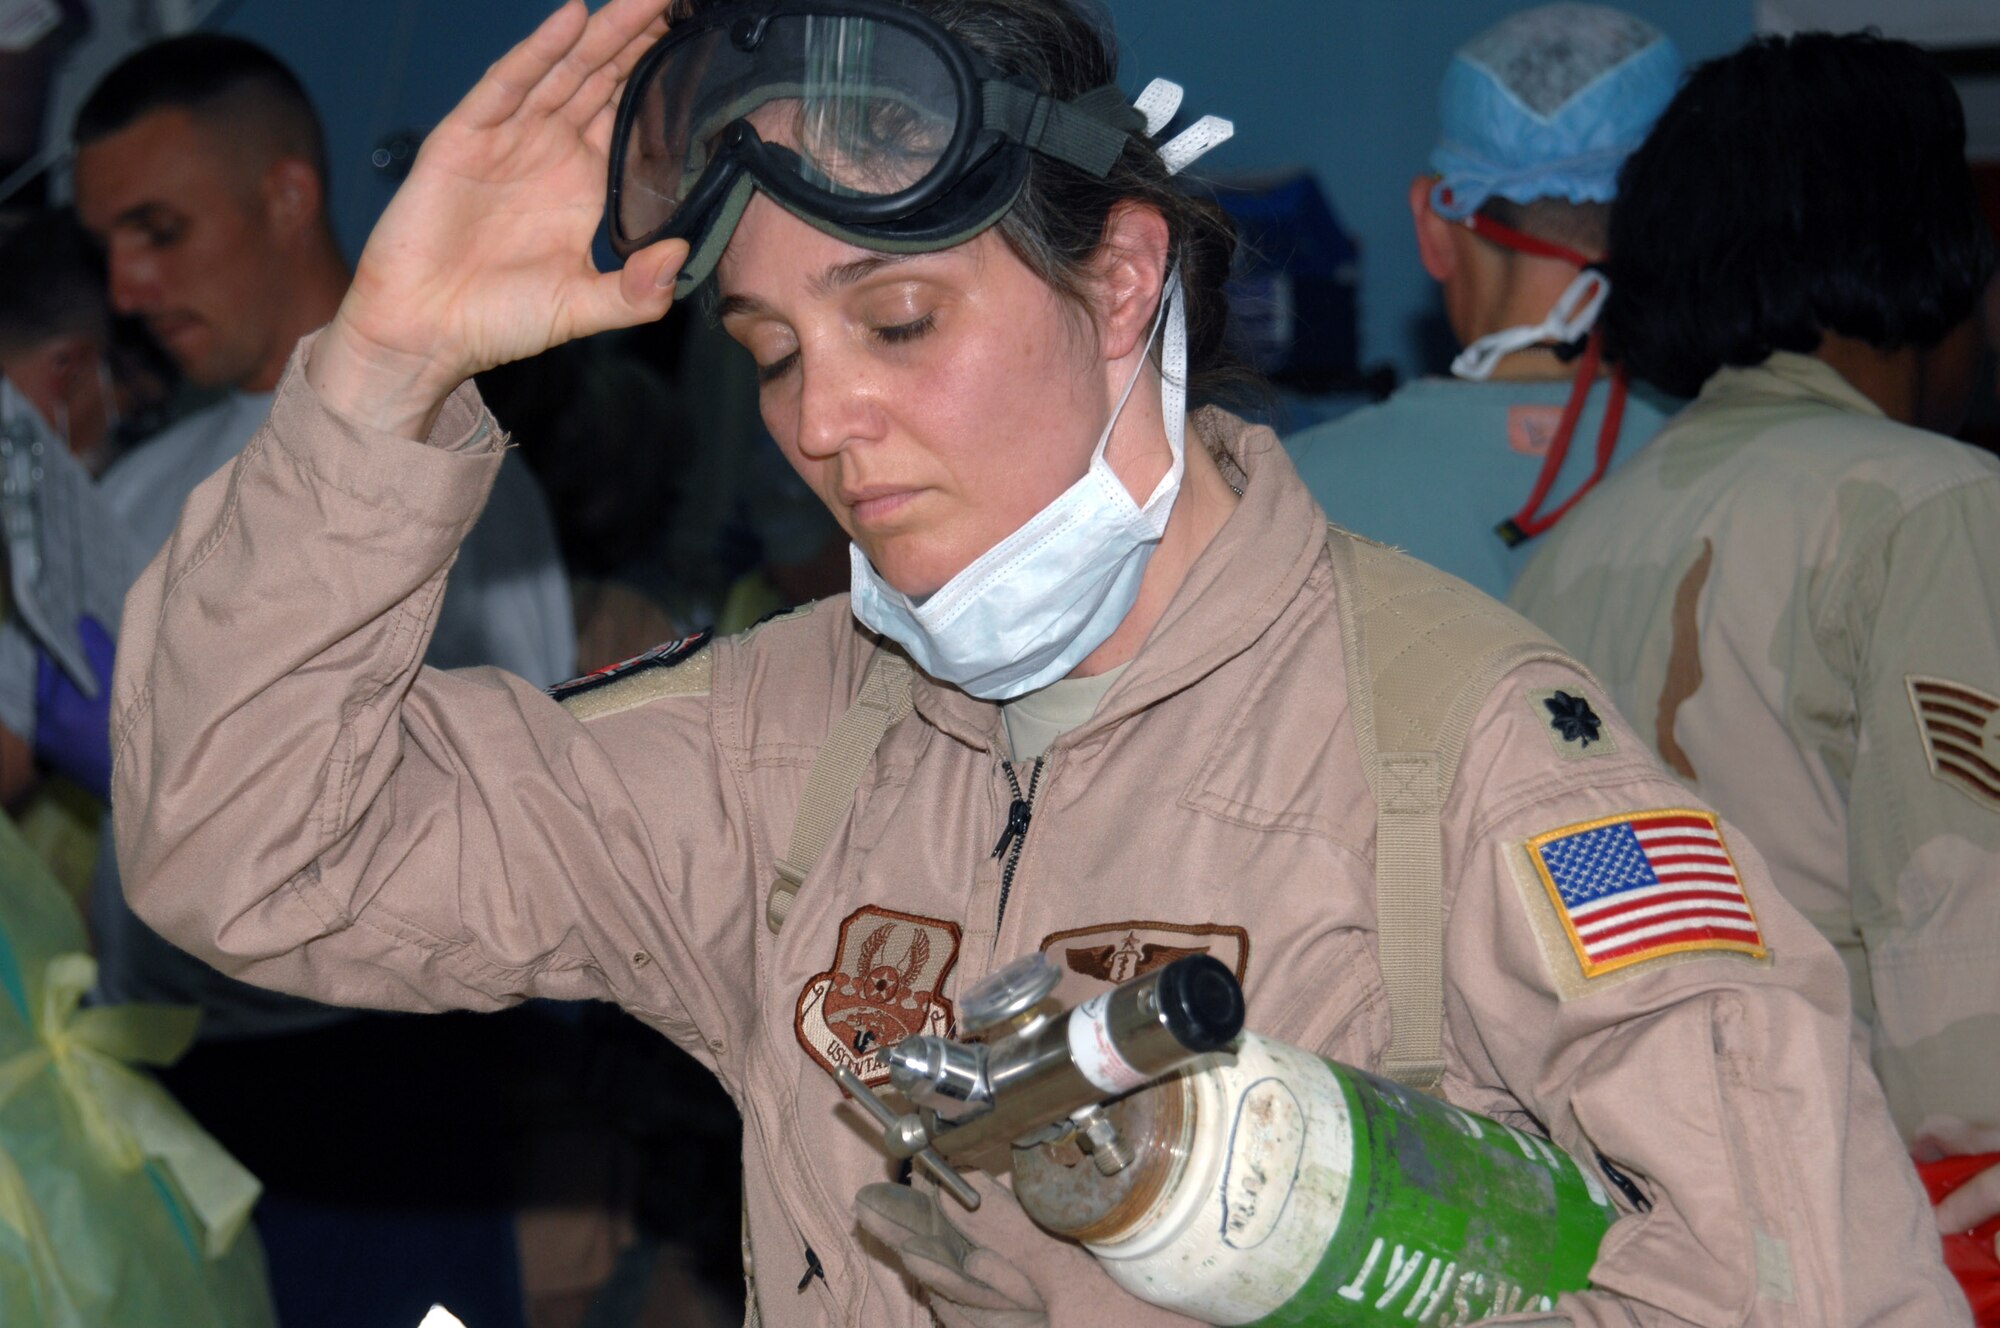 Lt. Col. Kimberly Bradley carries away an oxygen tank after helping a patient during an emergency trauma situation June 8 at Kirkuk Regional Air Base, Iraq. Colonel Bradley is with the 506th Expeditionary Medical Squadron. (U.S. Air Force photo/Senior Airman Kristin Ruleau)